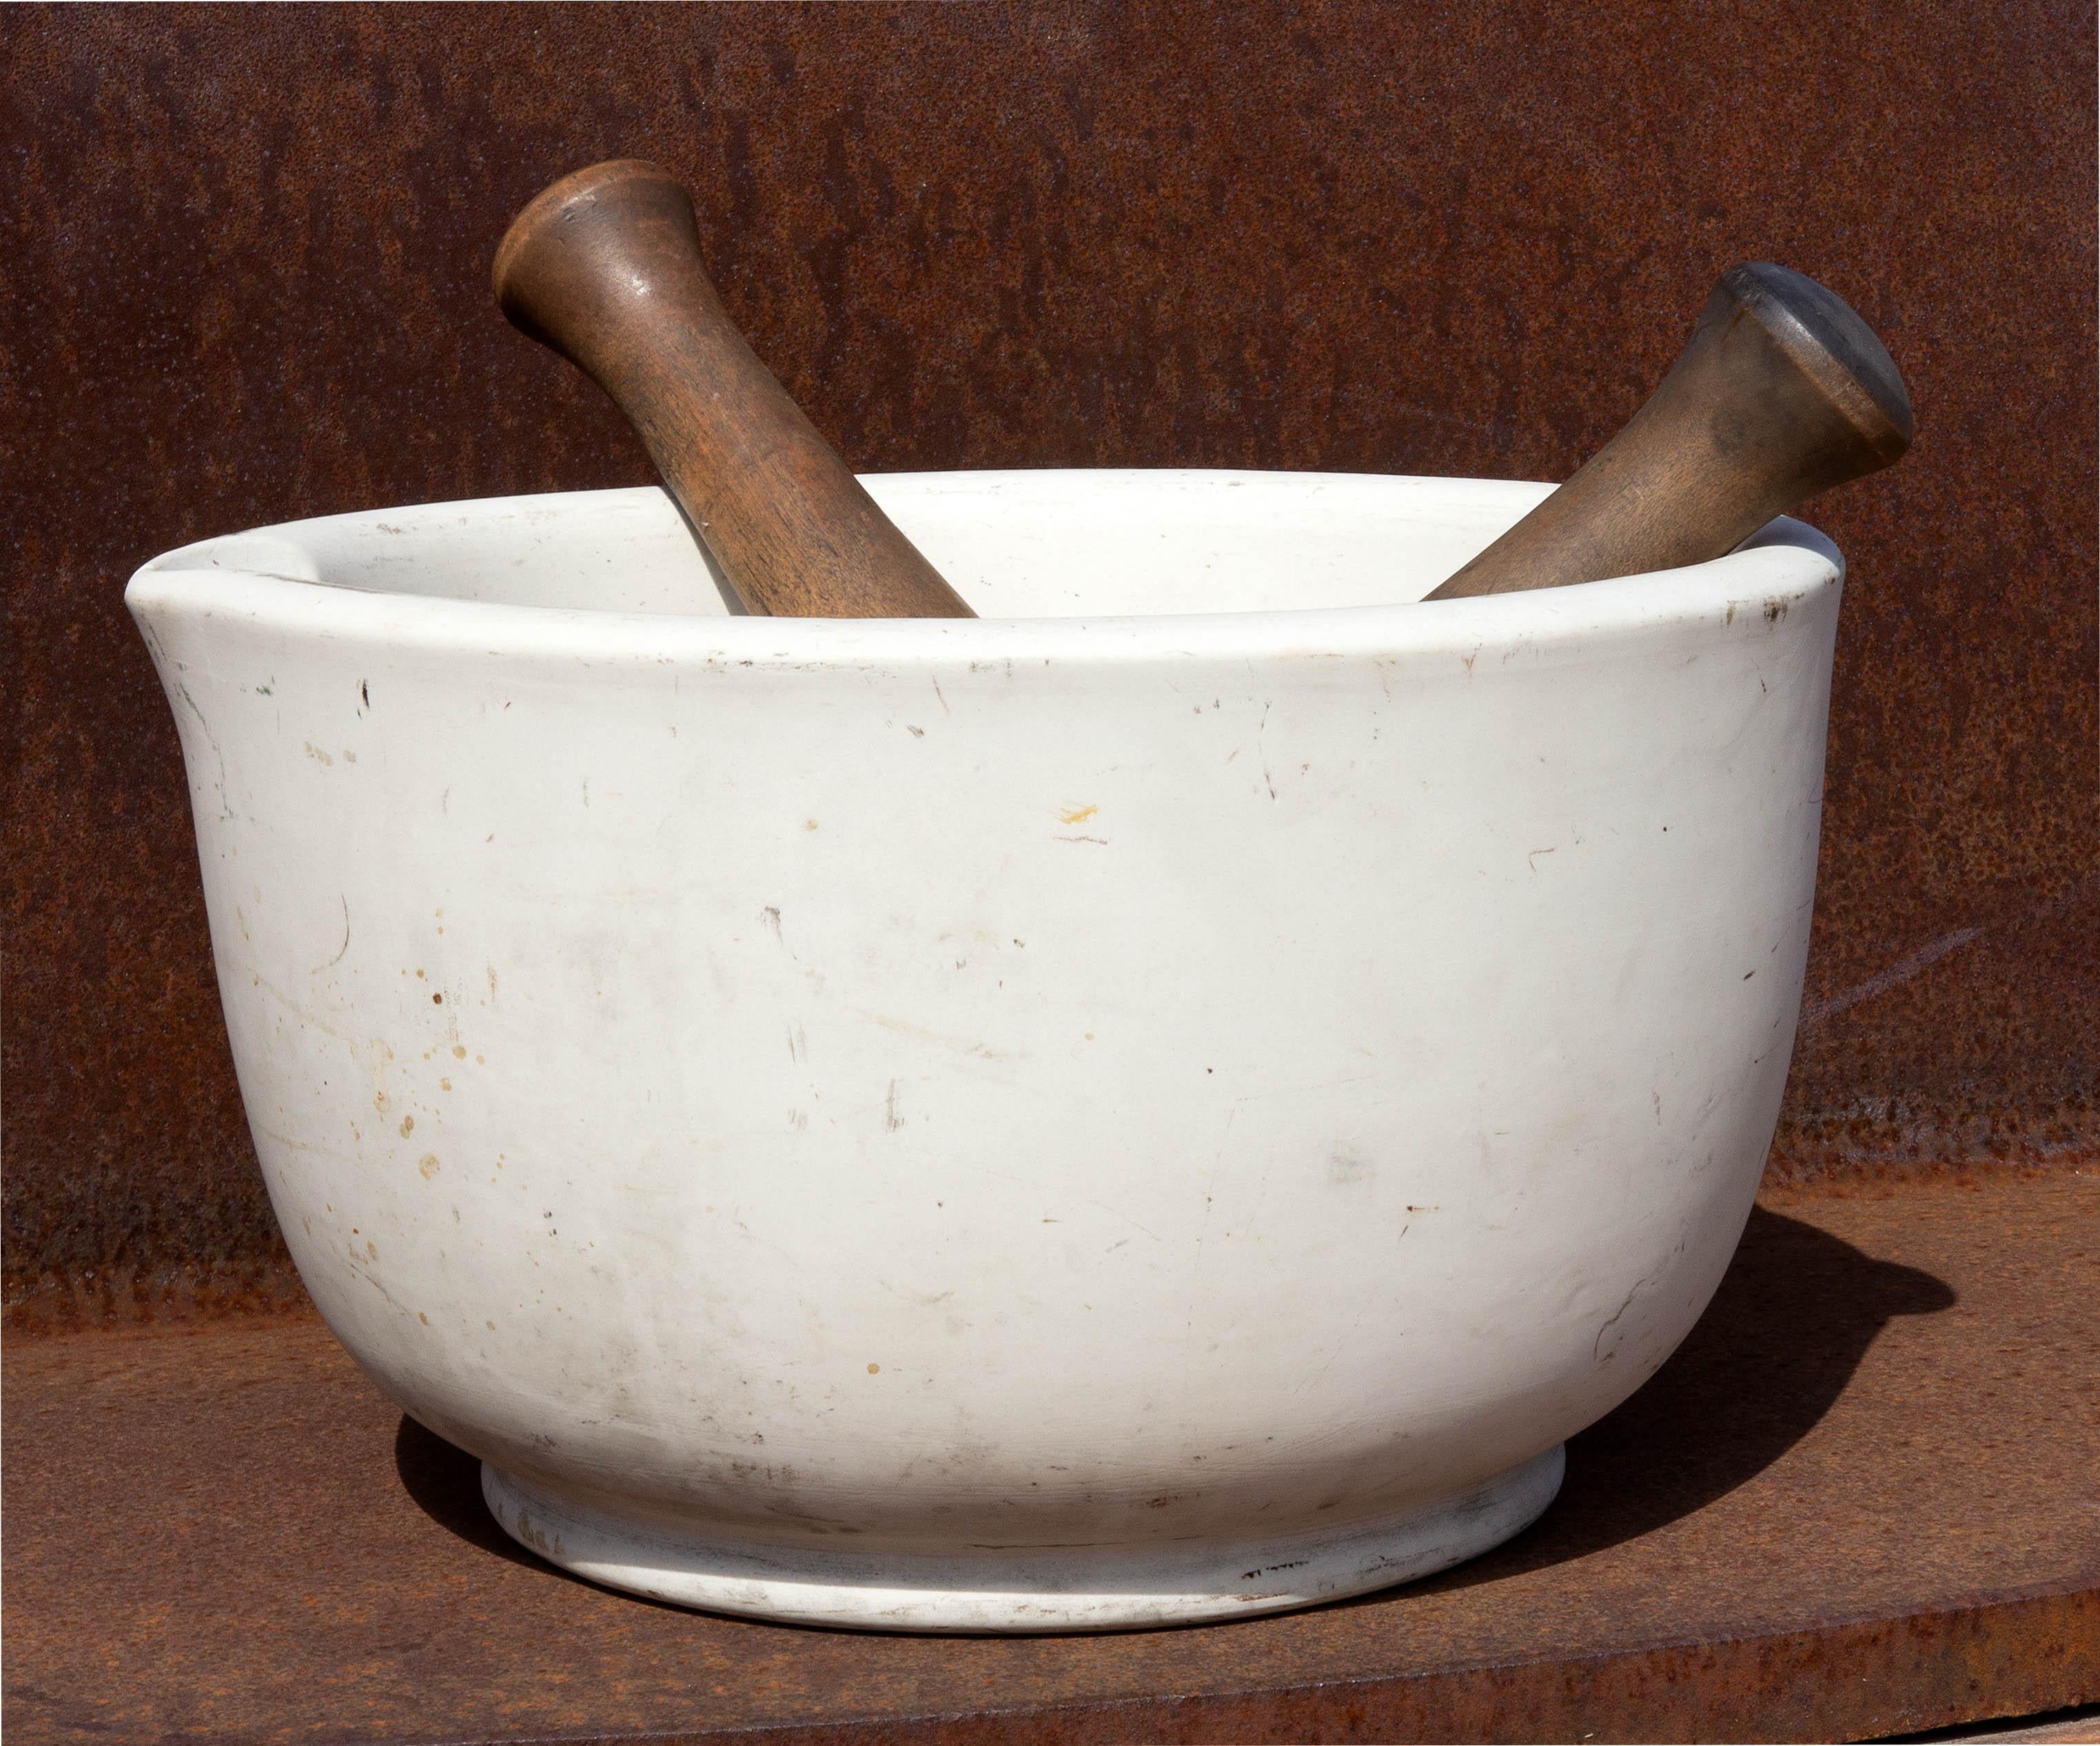 Mammoth porcelain mortar and pestle. Great for cooks or as an accent piece. Heavy duty. Mortar weighs over 25 lbs. 14.75